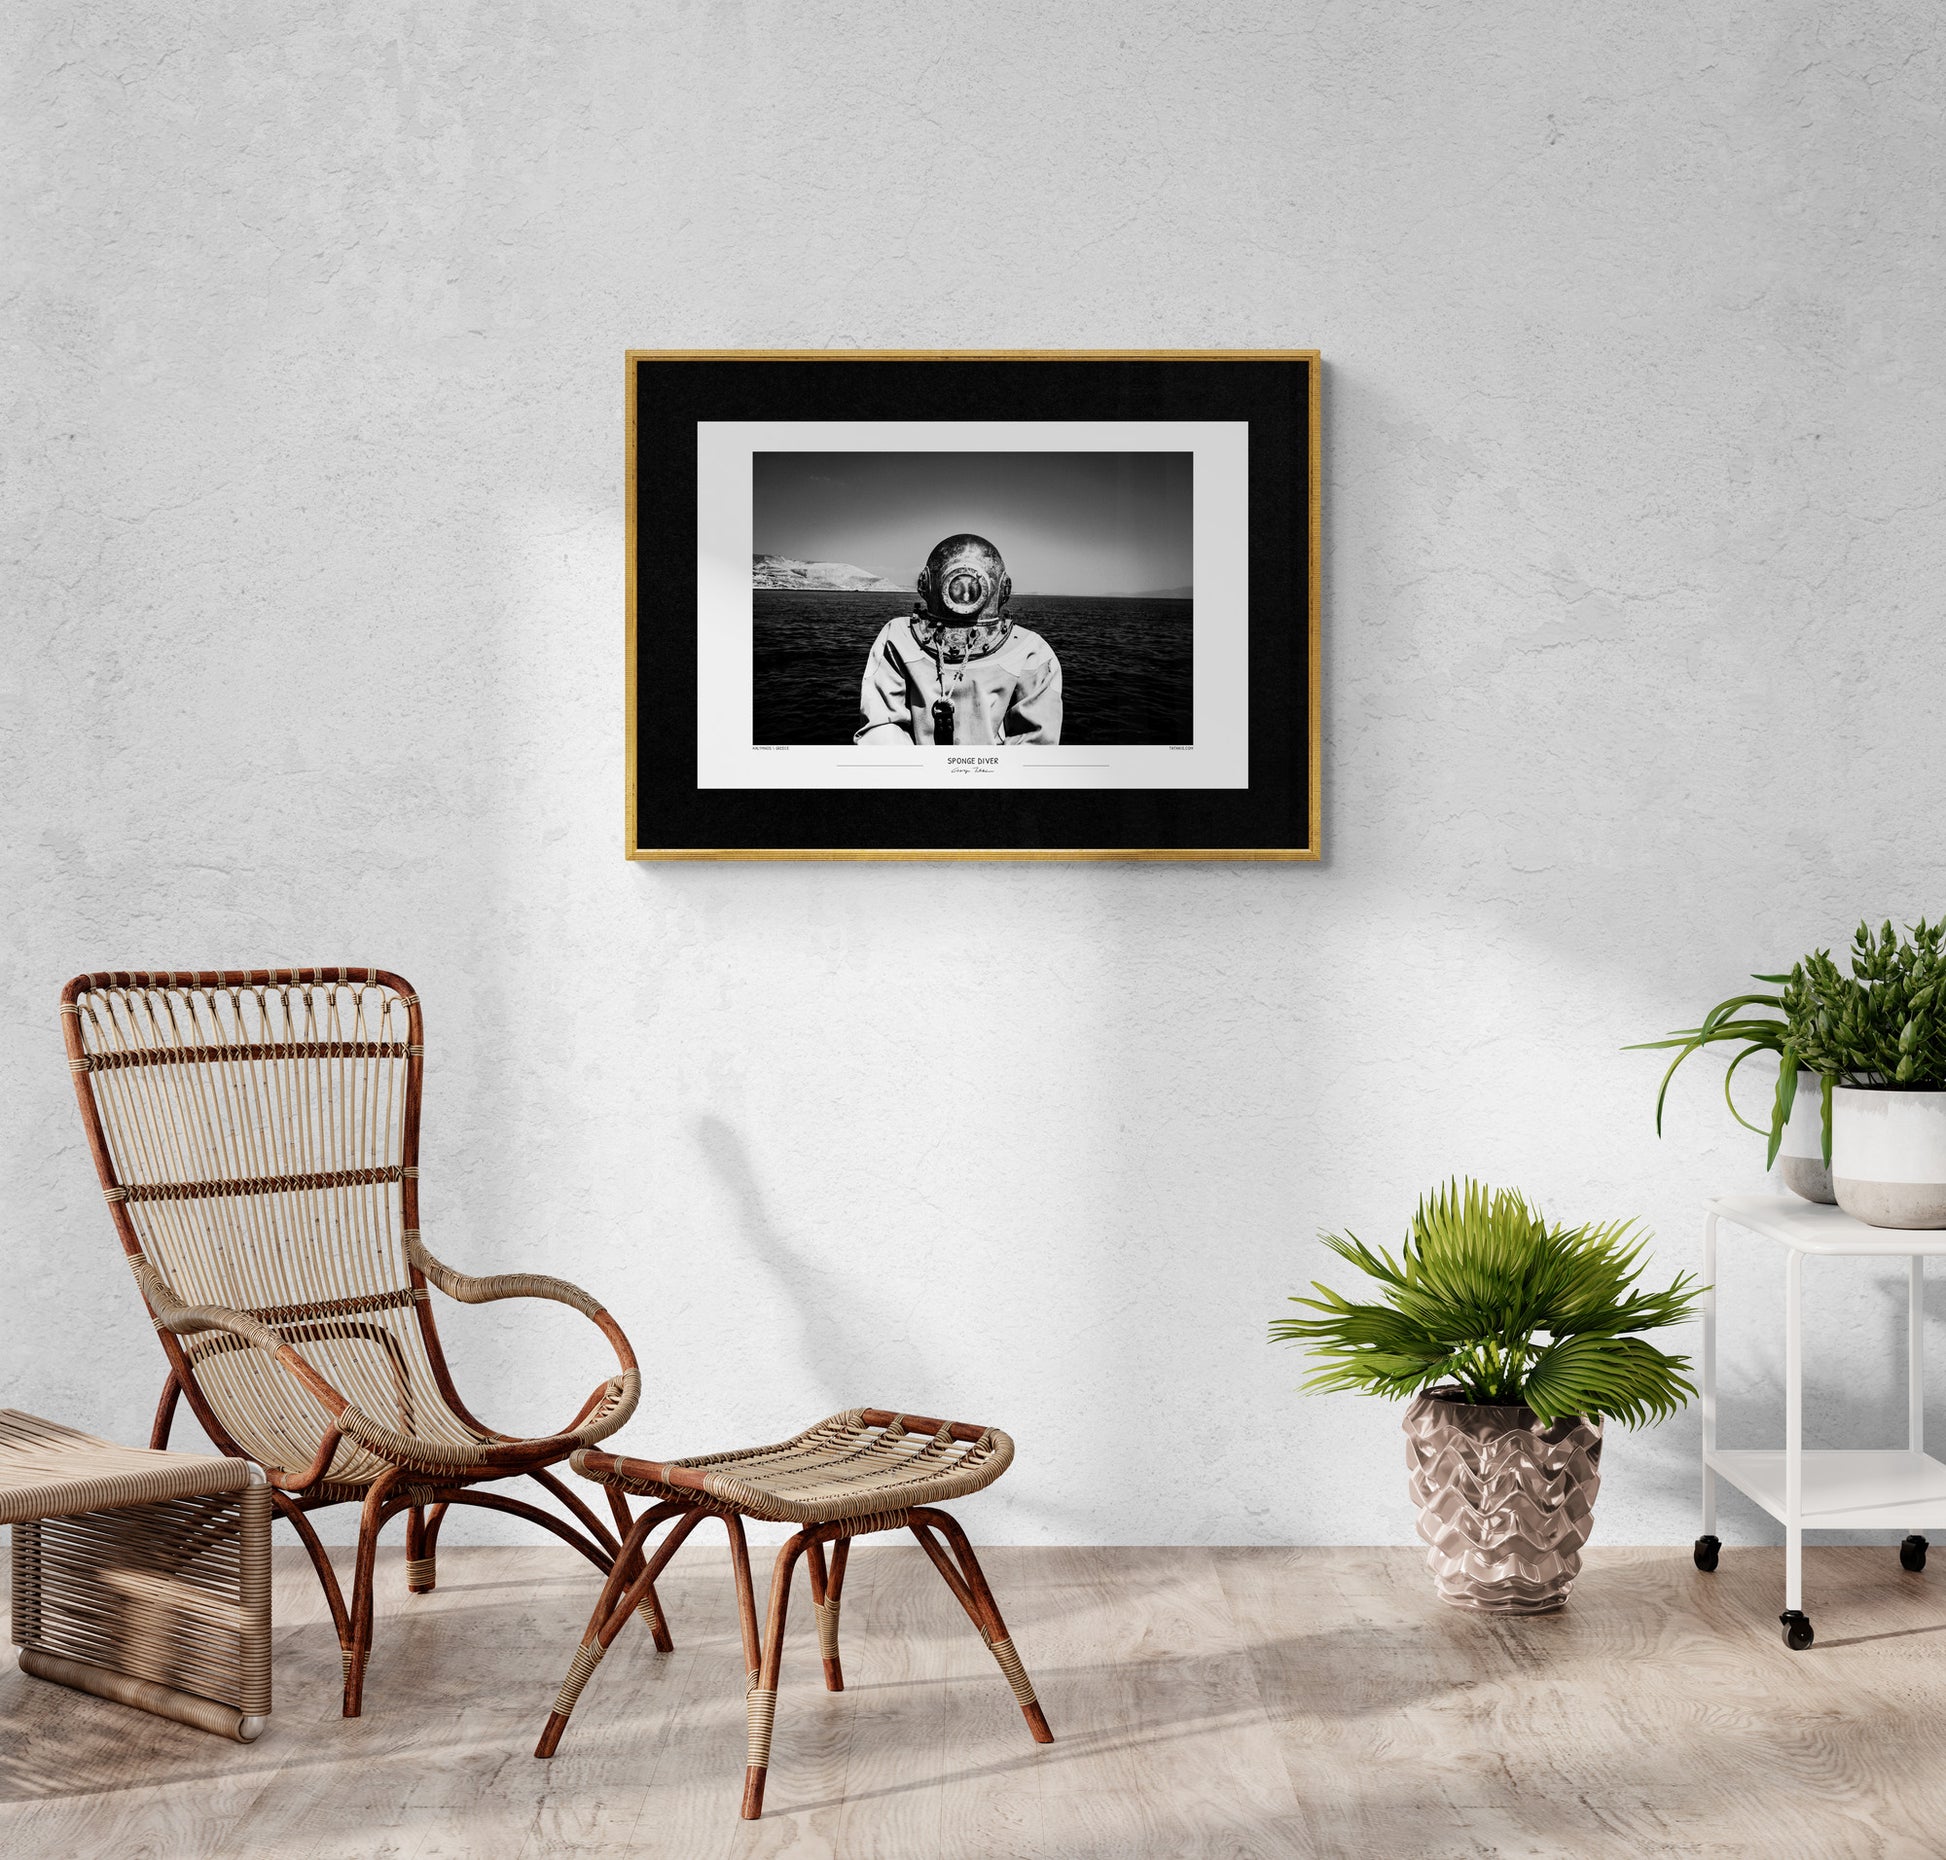 The Sponge Diver | Black-and-White photography Wall Art Poster from Greece, by George Tatakis - room with cane armchair